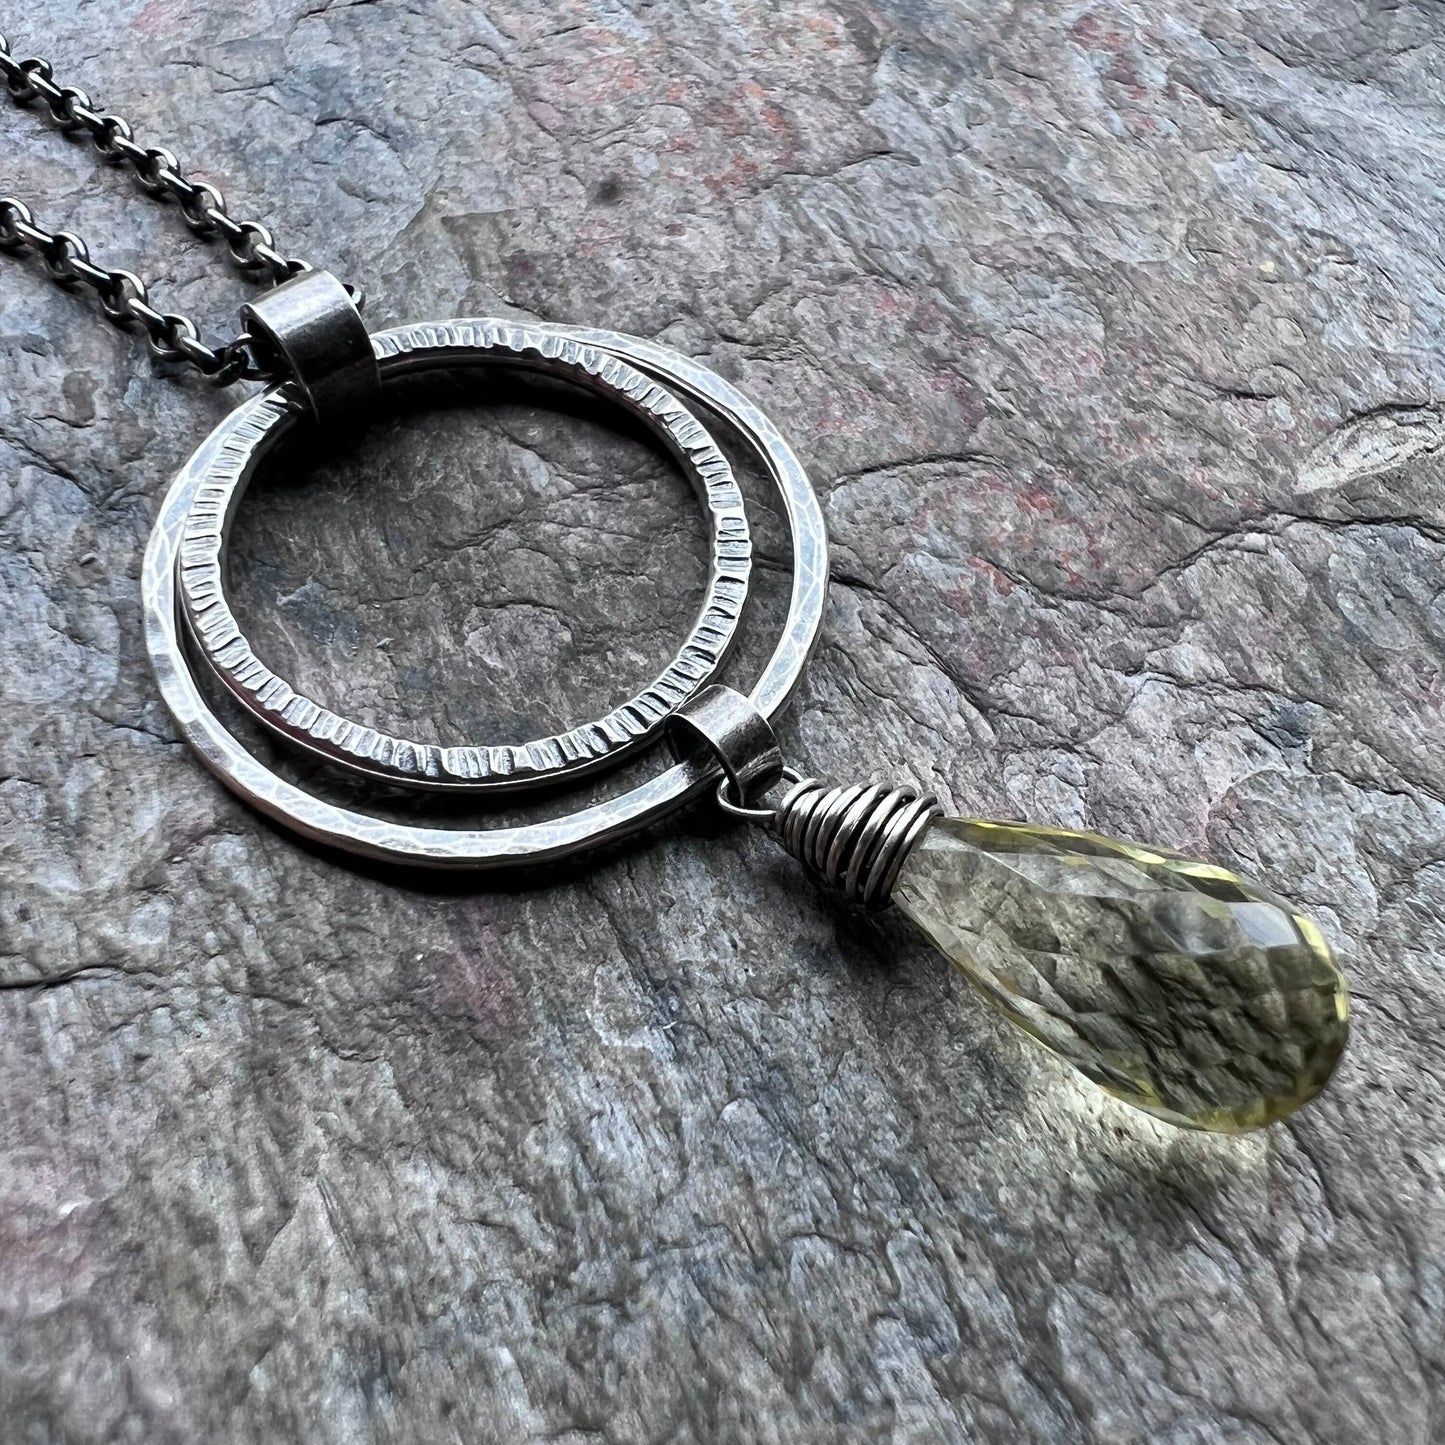 Sterling Silver Lemon Topaz Necklace - Genuine Lemon Topaz and Hammered Rings Pendant on Sterling Silver Chain - Handmade Jewelry